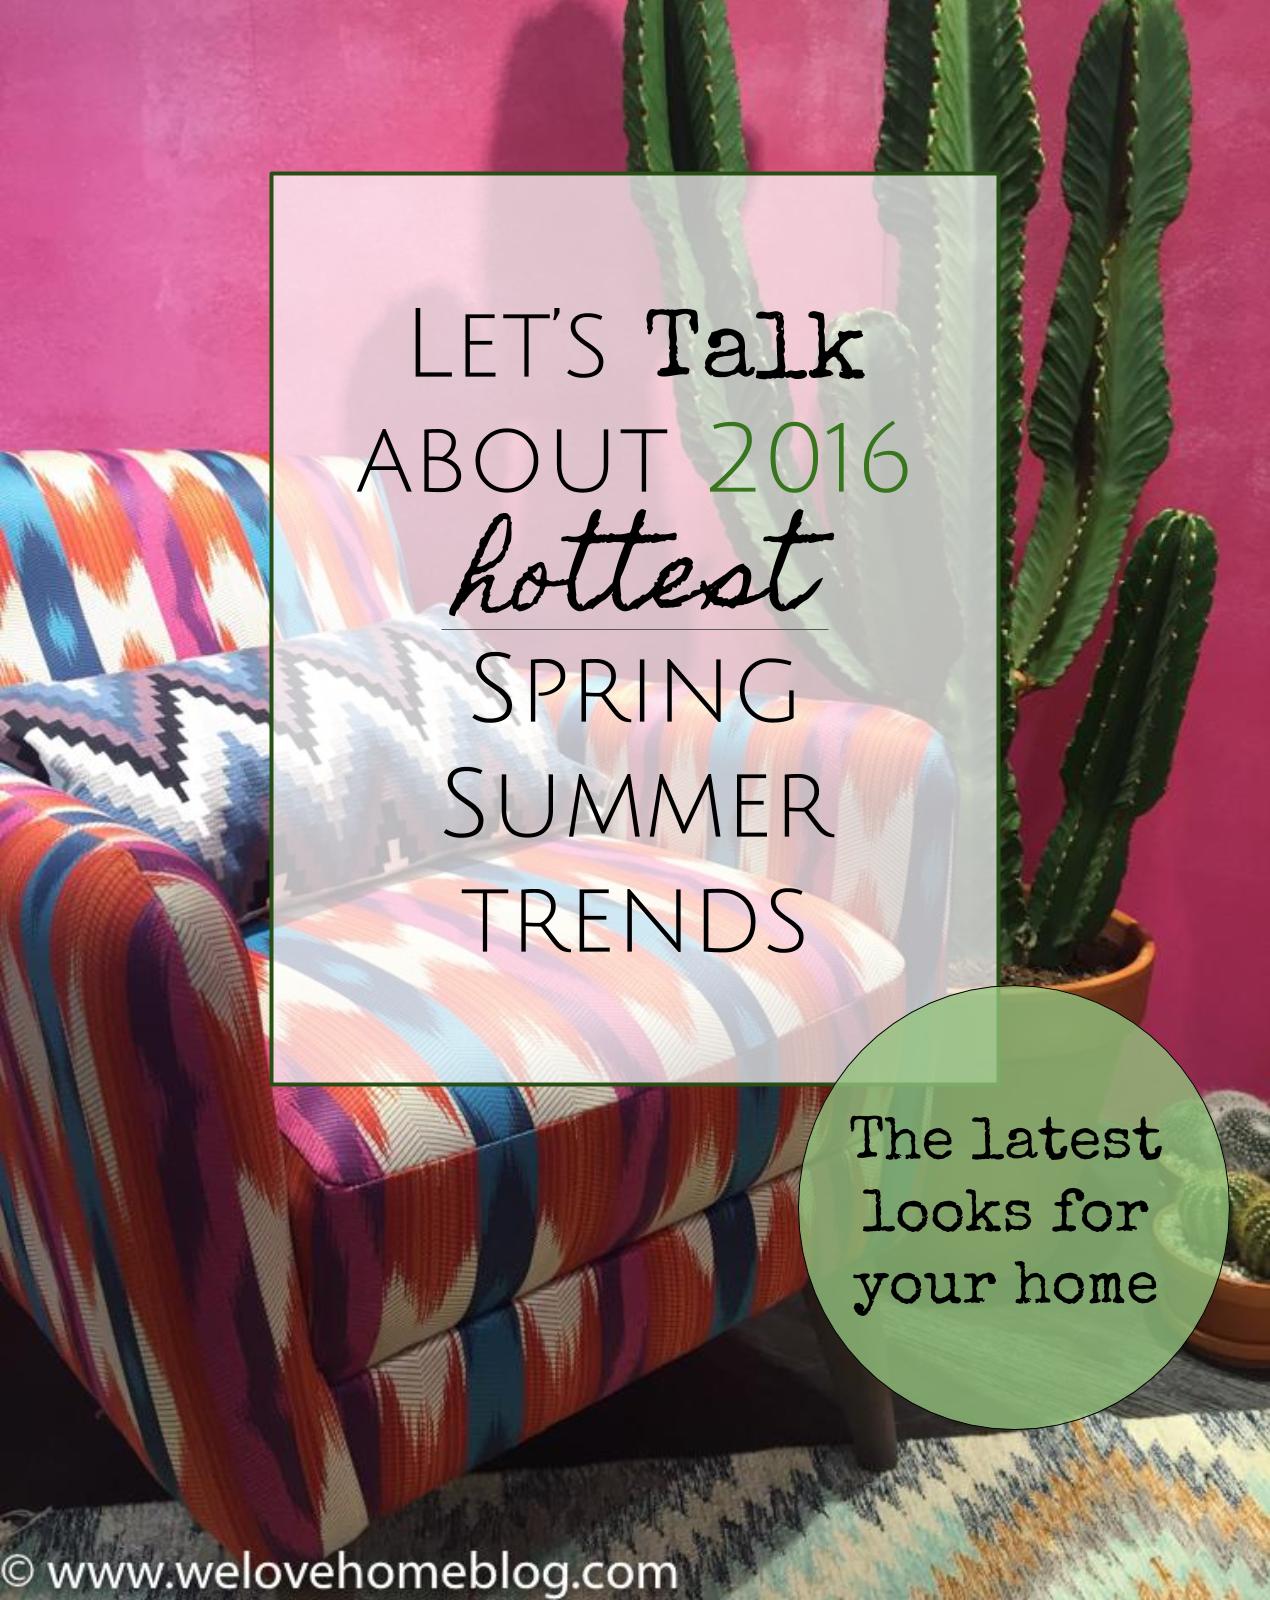 Let's take about 2016 hottest spring summer trends. The latest looks for your home. From www.welovehomeblog.com